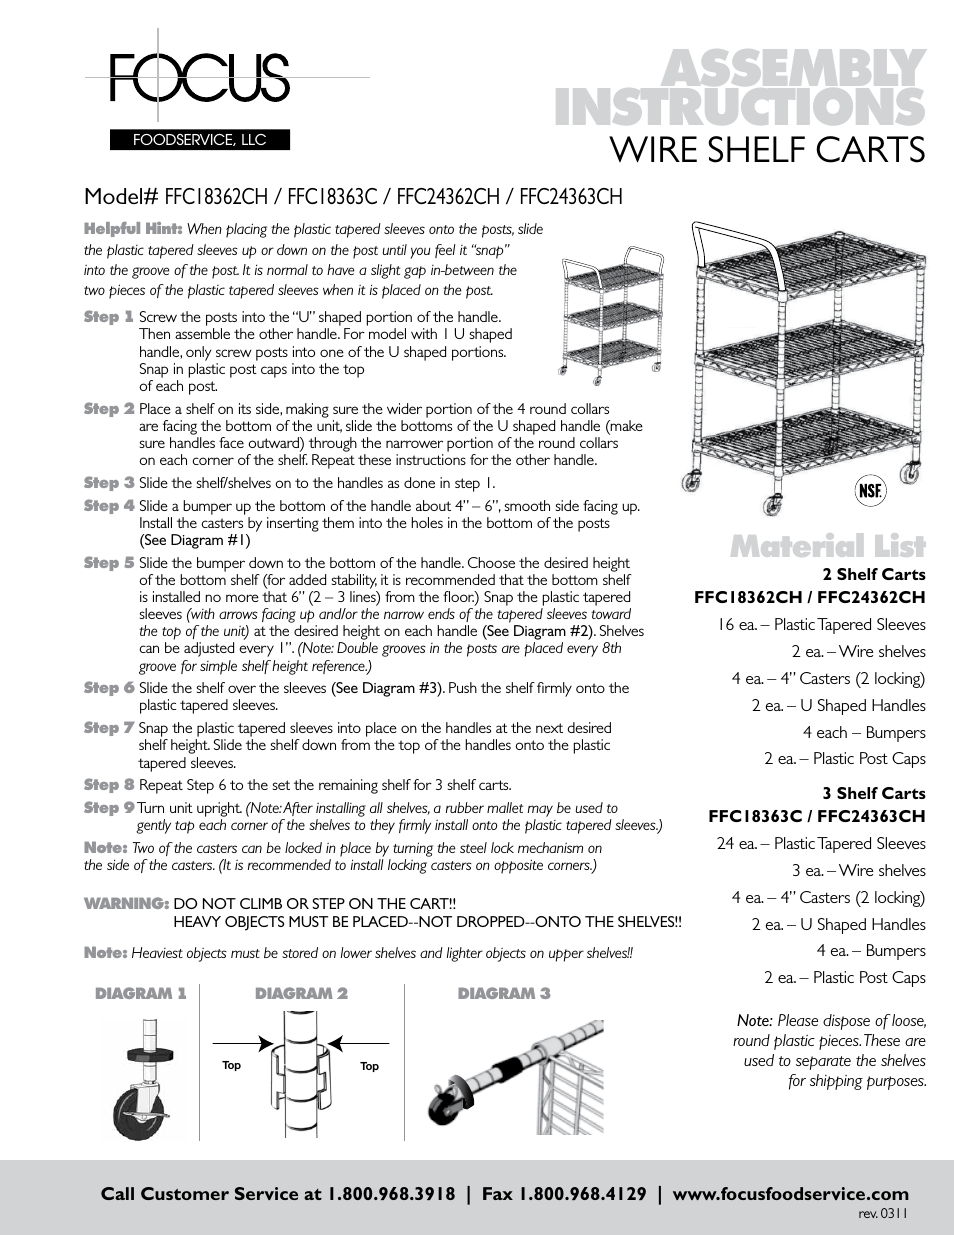 FFC24363CH WIRE SHELF CARTS  - Assembly Instructions